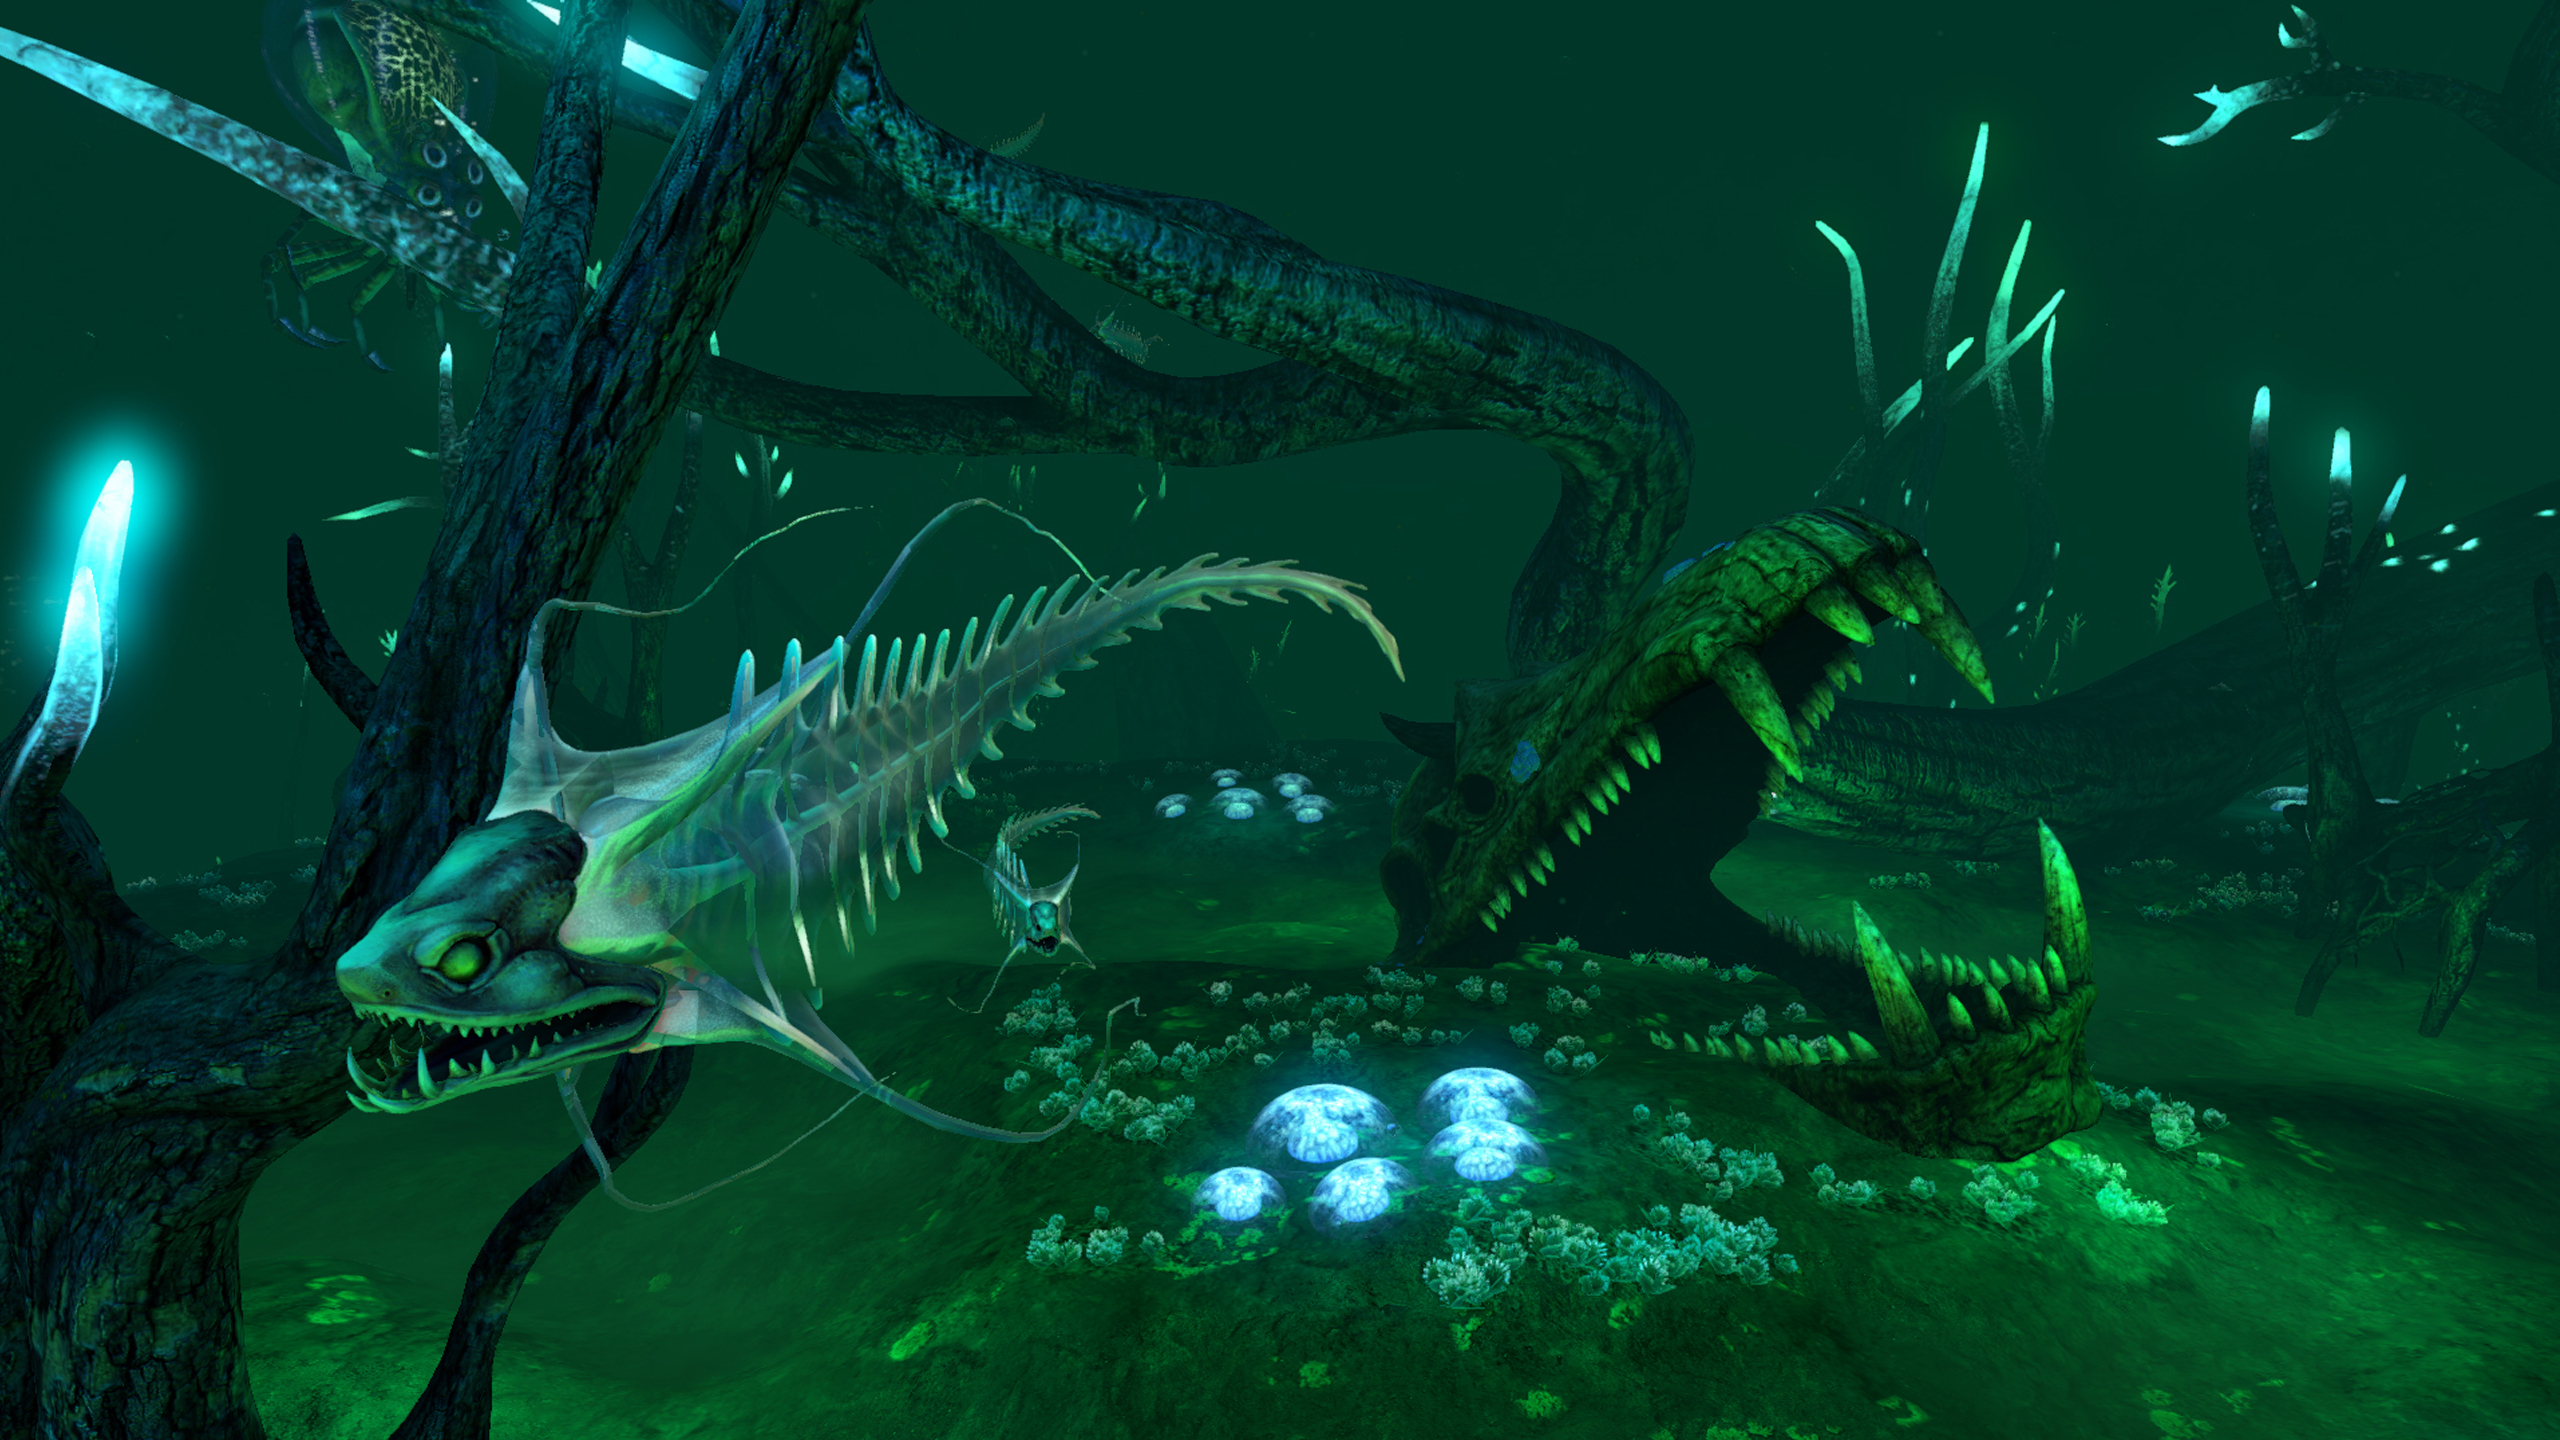 How To Find The Lost River Subnautica?